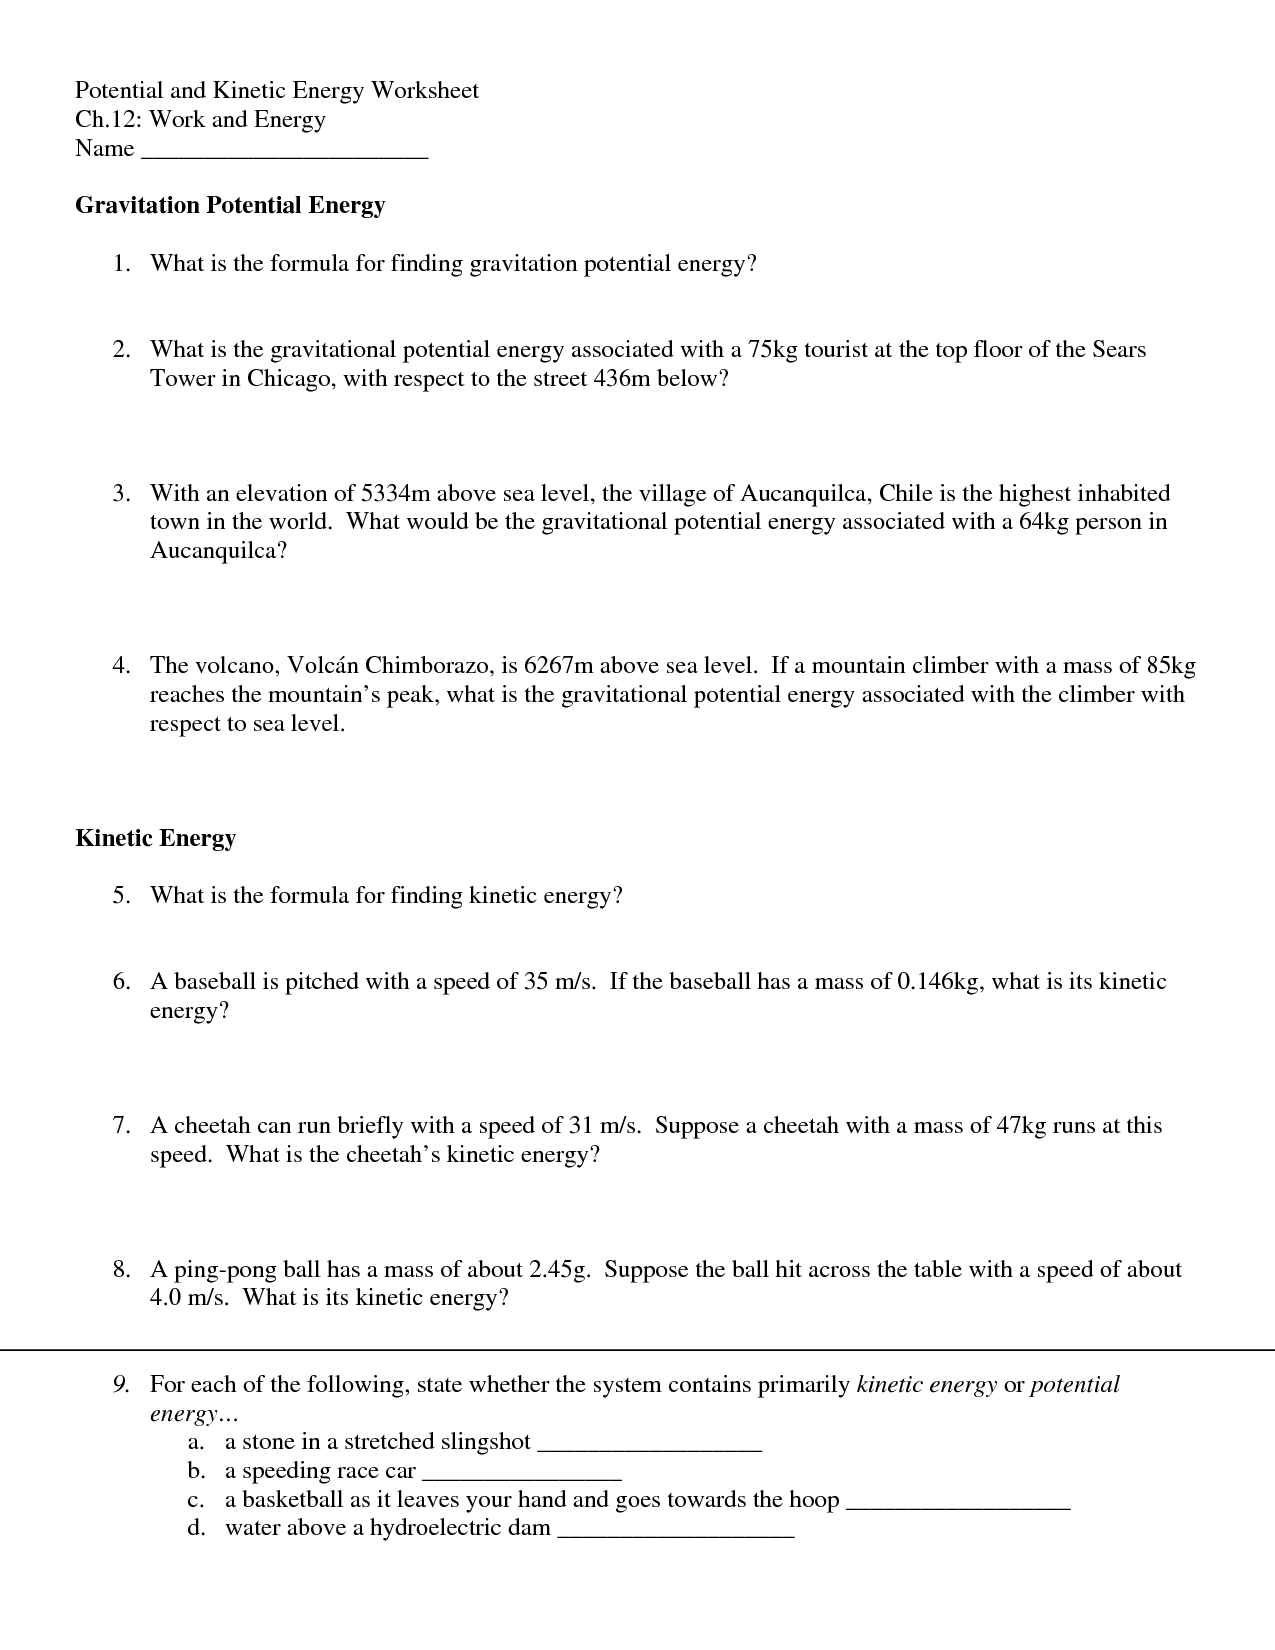 Potential Kinetic Energy Worksheet Answers Image